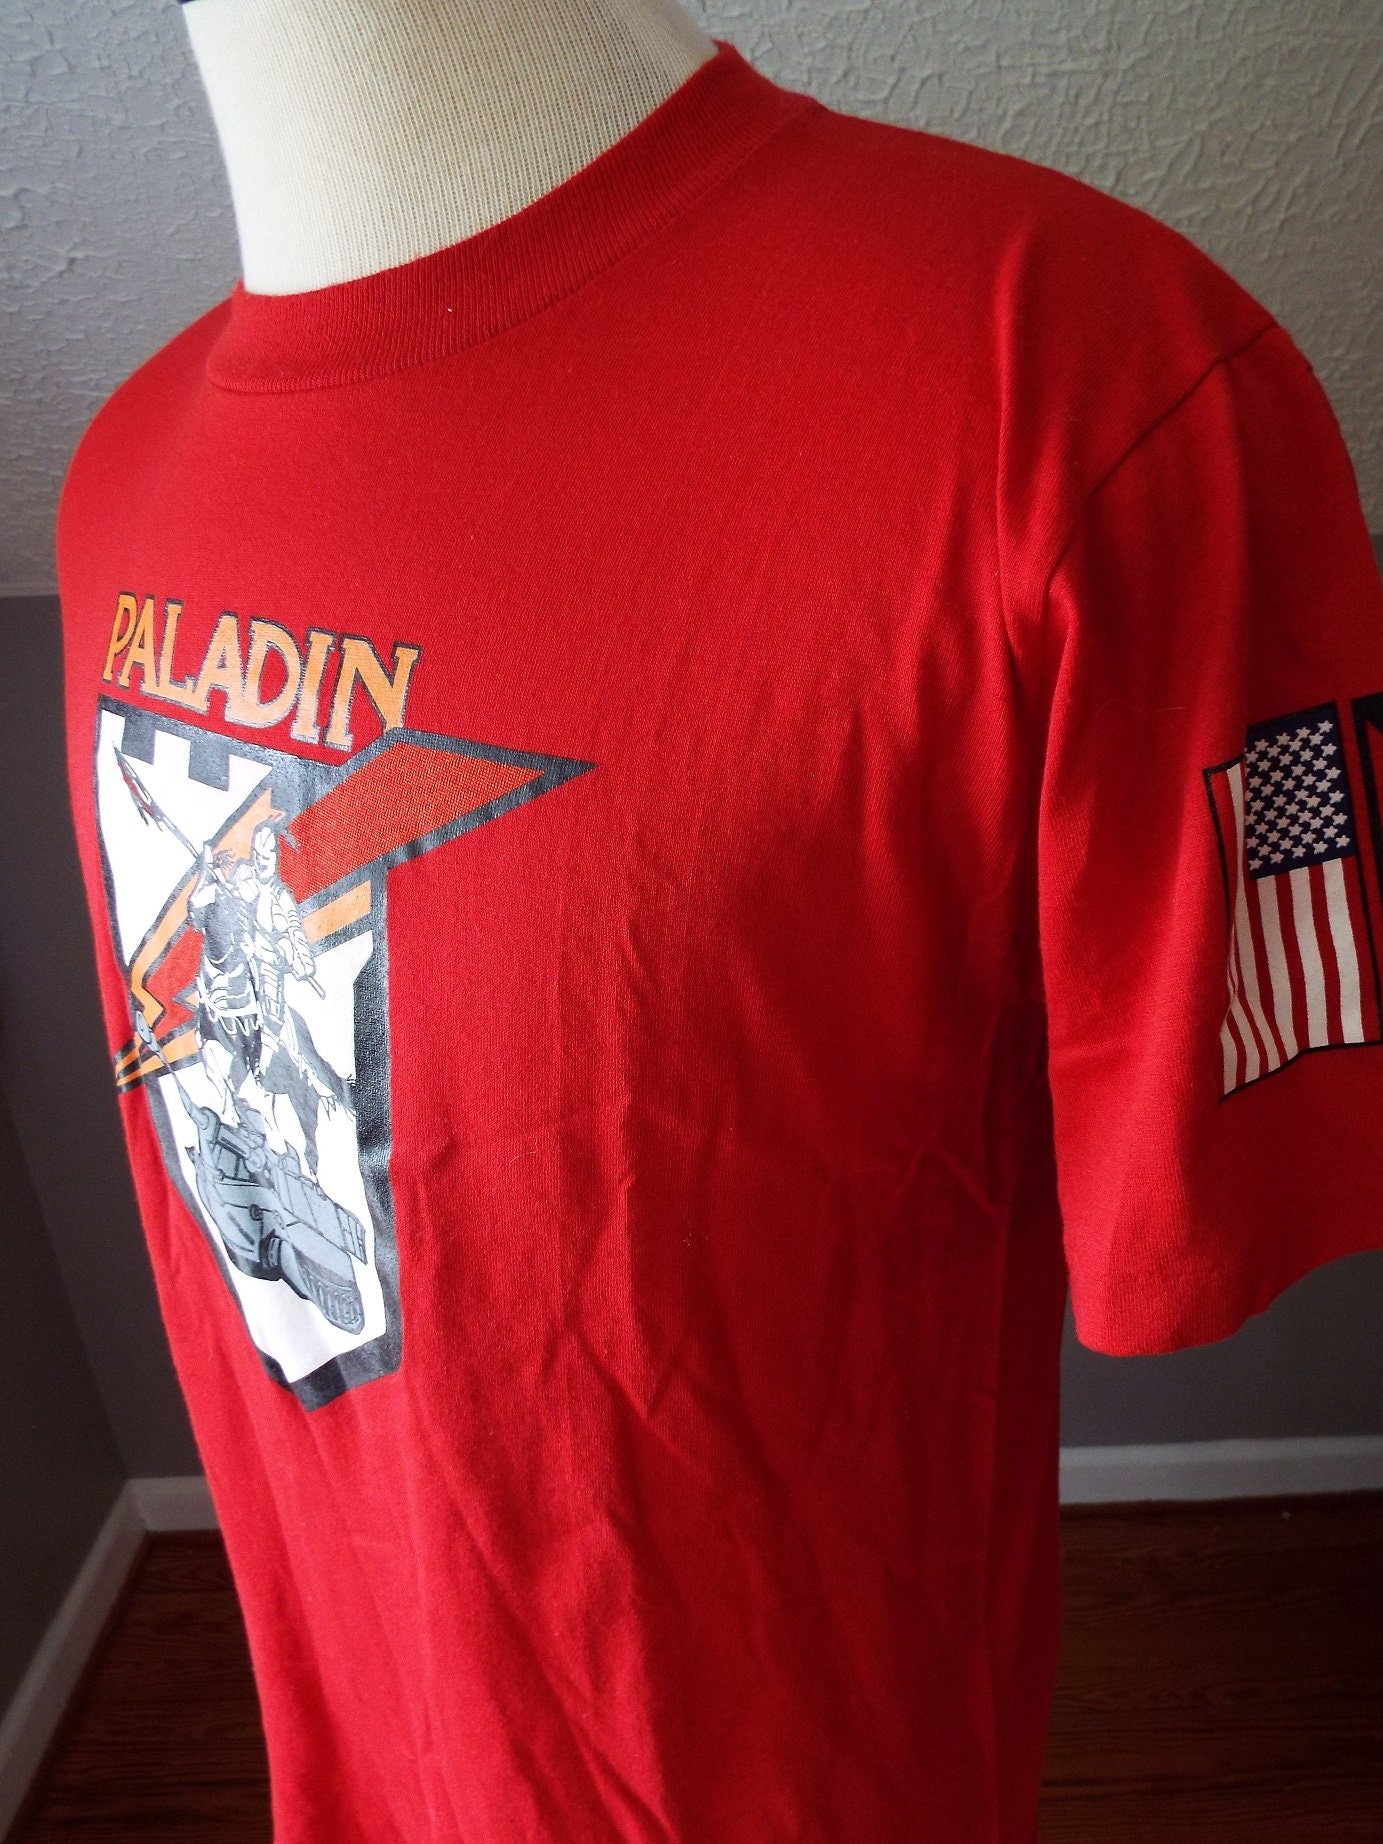 Vintage Red US Army Paladin Tank T Shirt by Jerzees